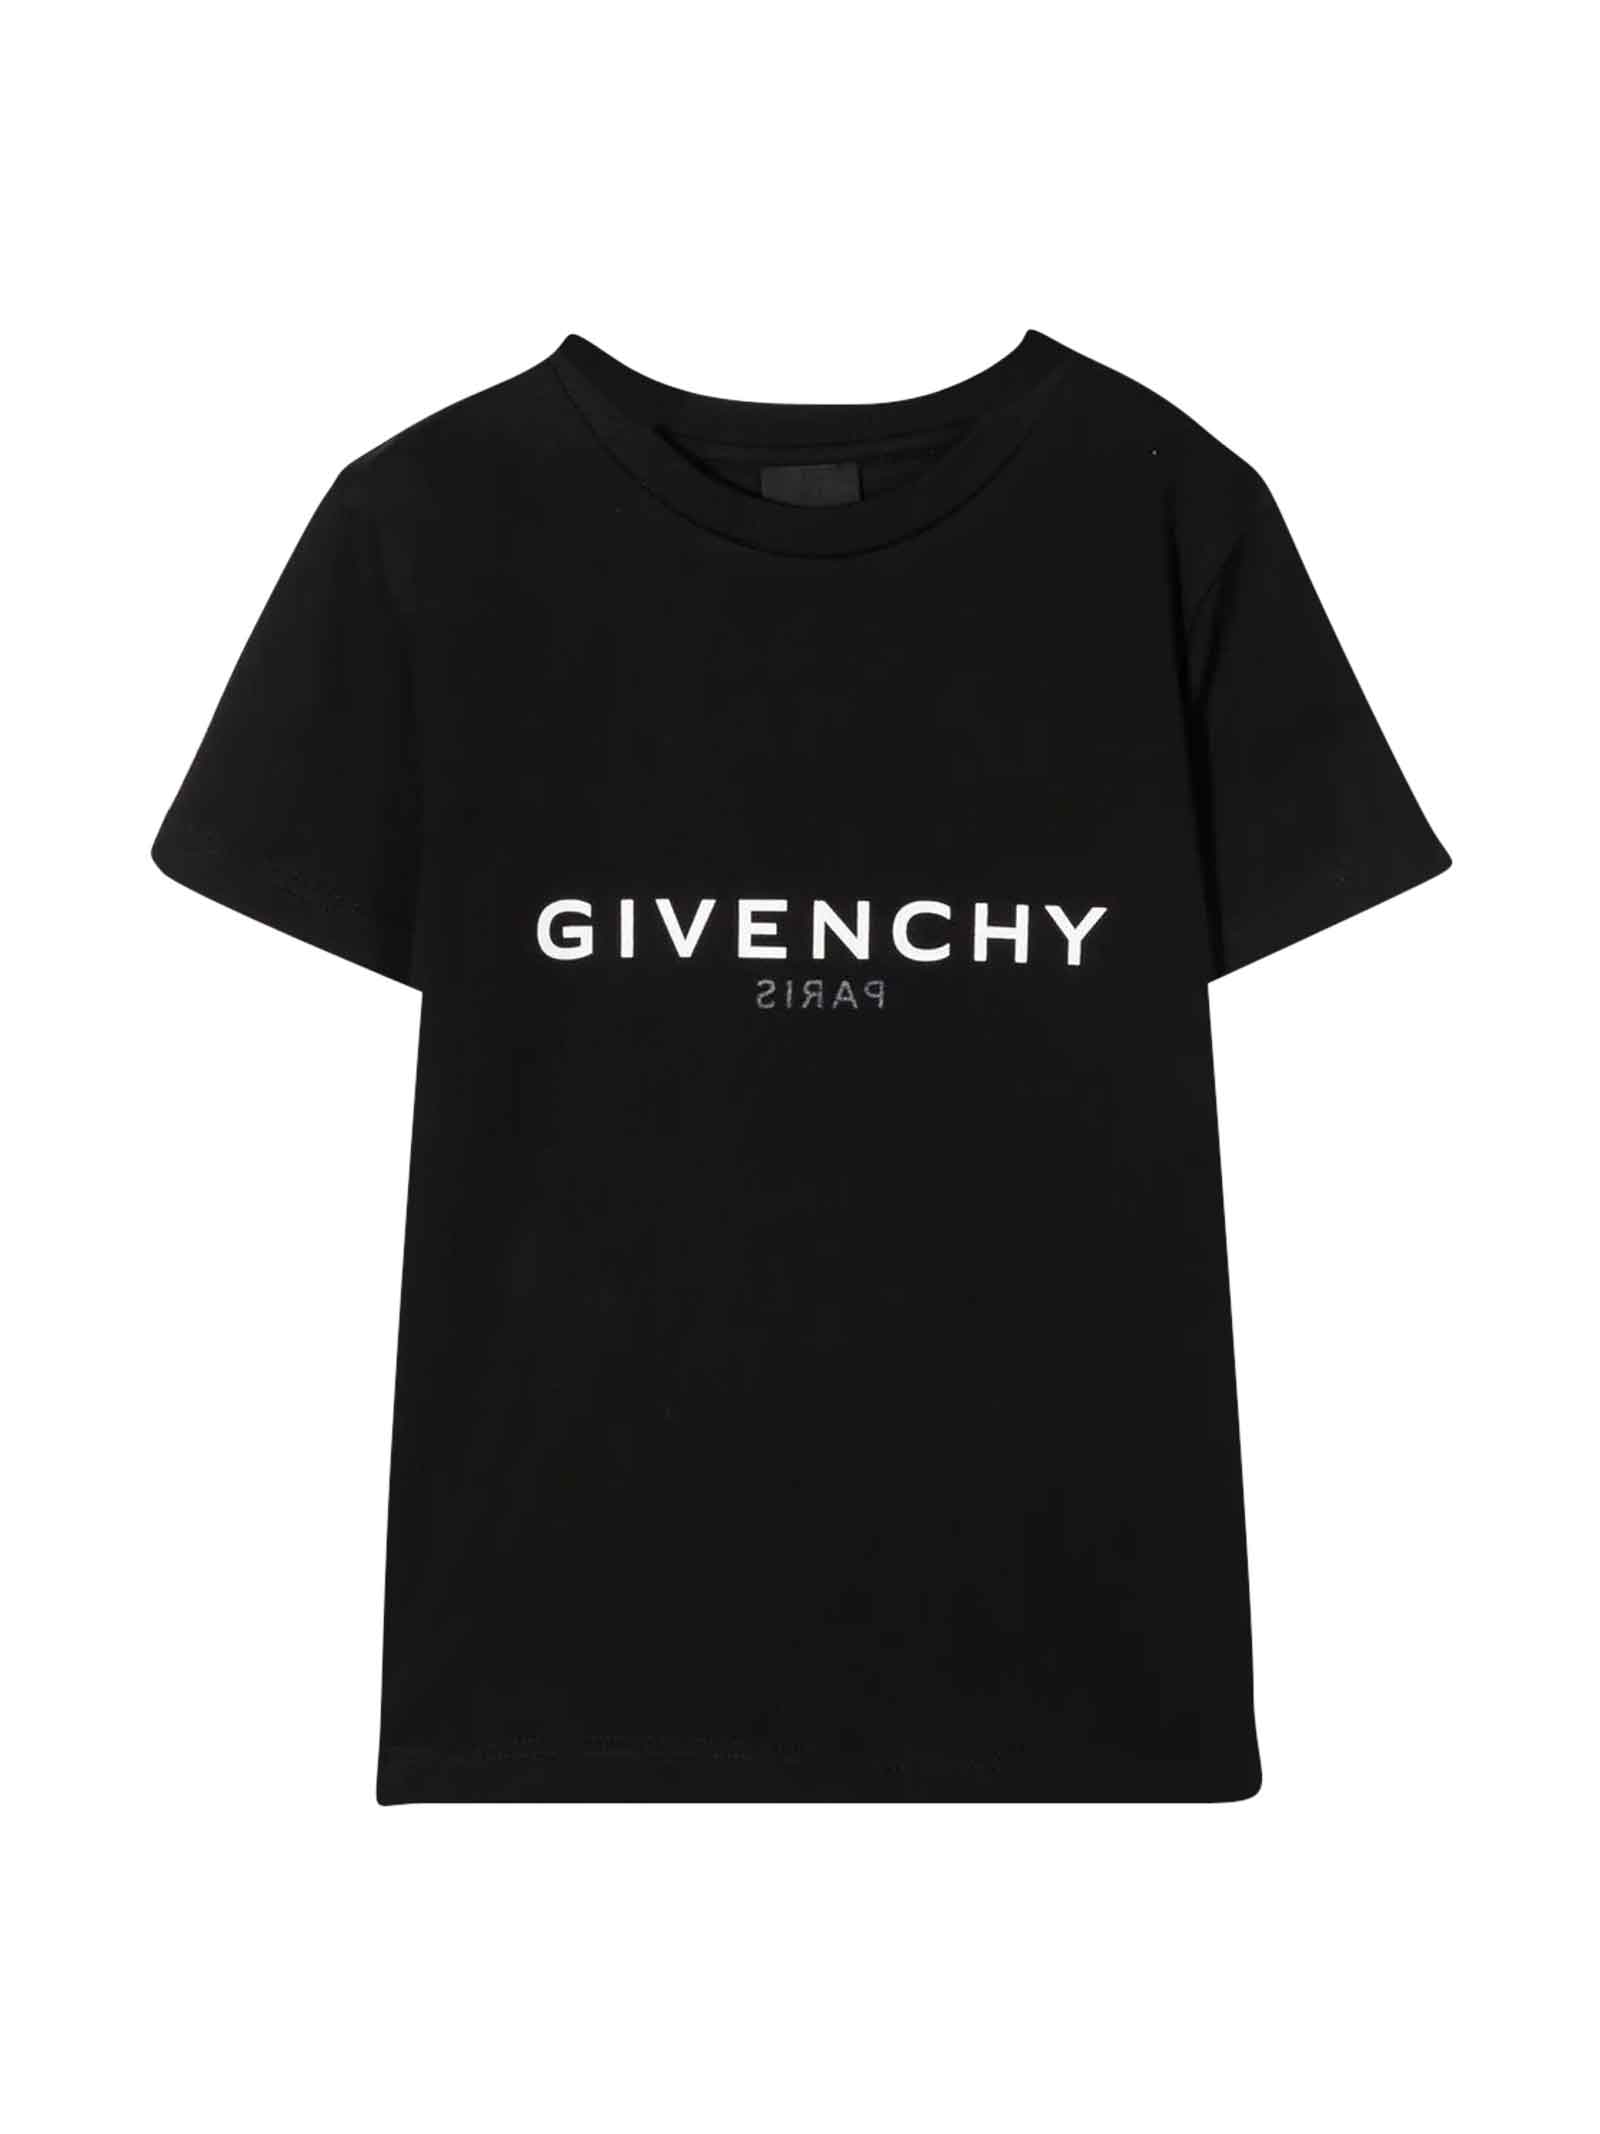 Givenchy Boy T-shirt With Print